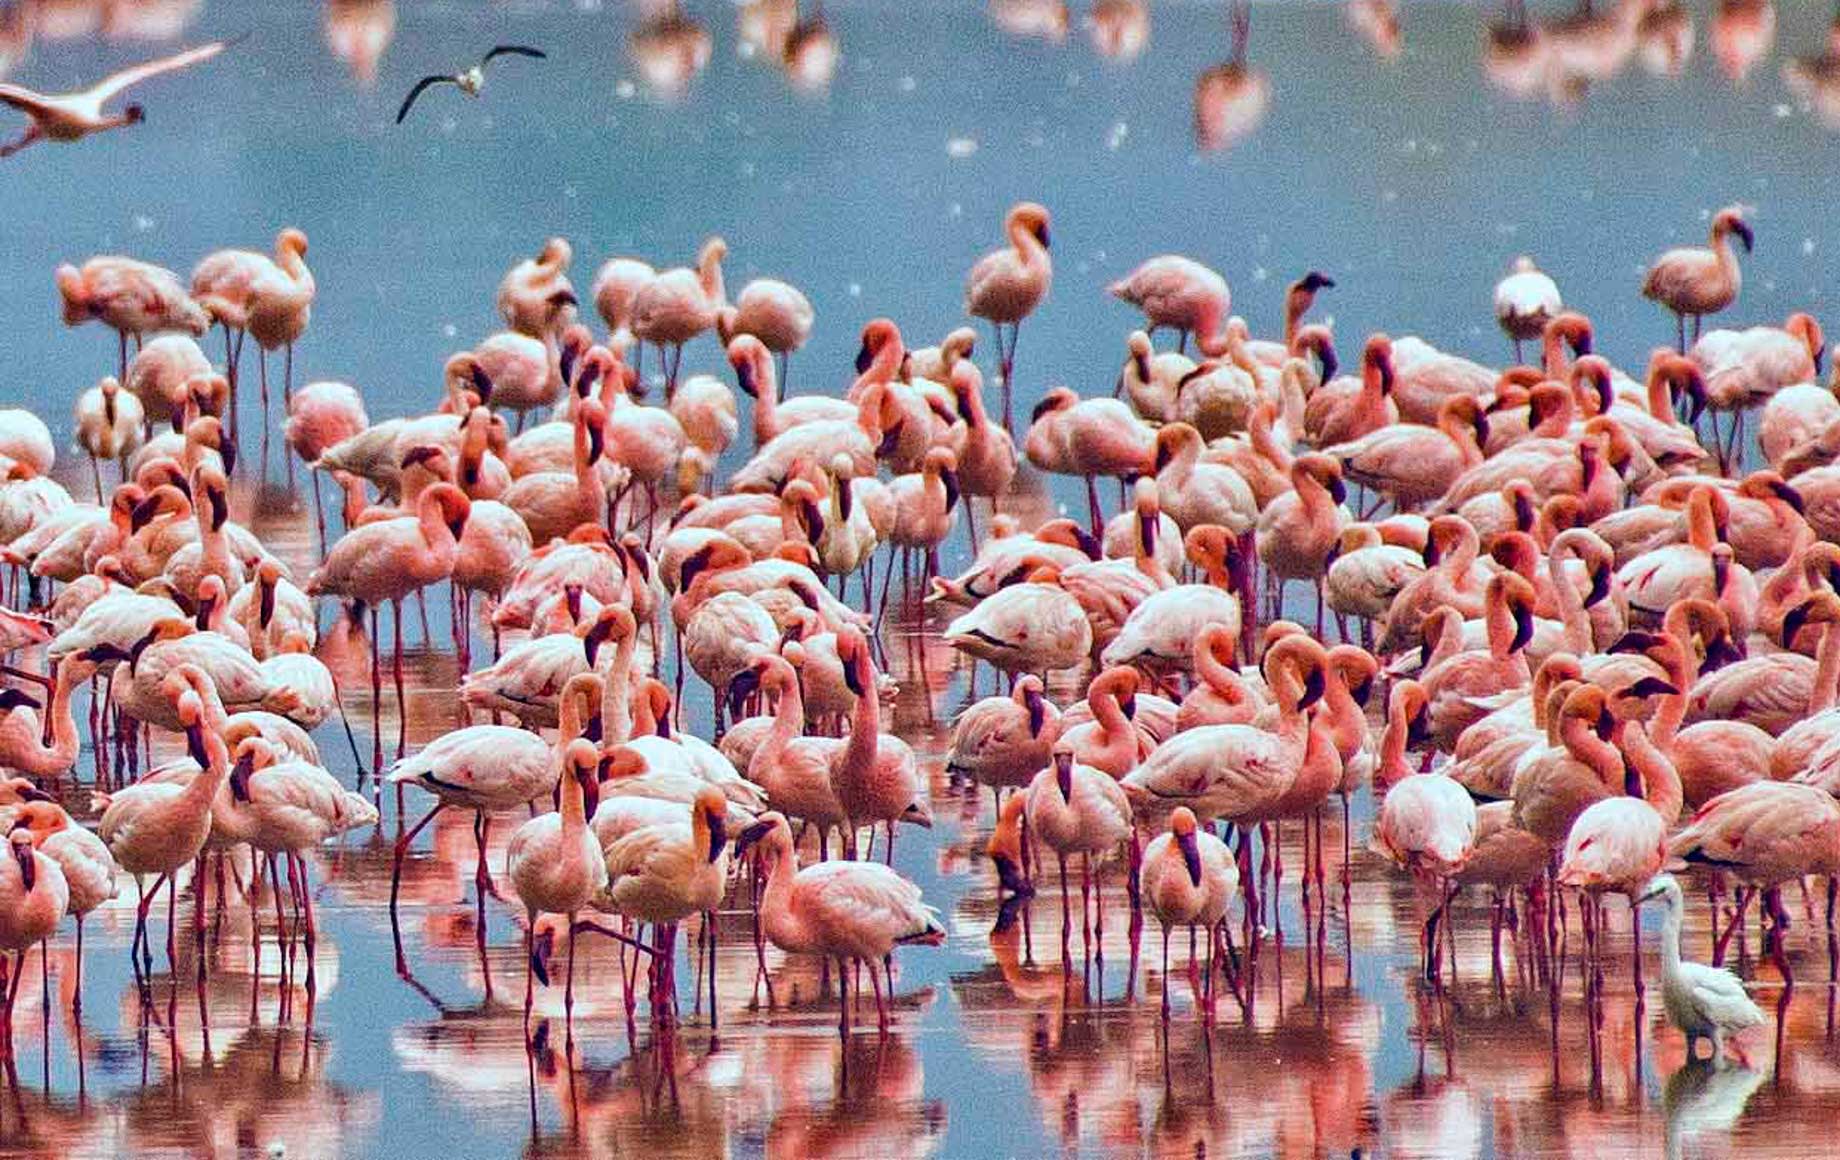 Lake Manyara itself is the main attraction of the Park, and attracts a variety of waterbirds, including huge flocks of pink flamingos as well as pelicans, storks and cormorants.